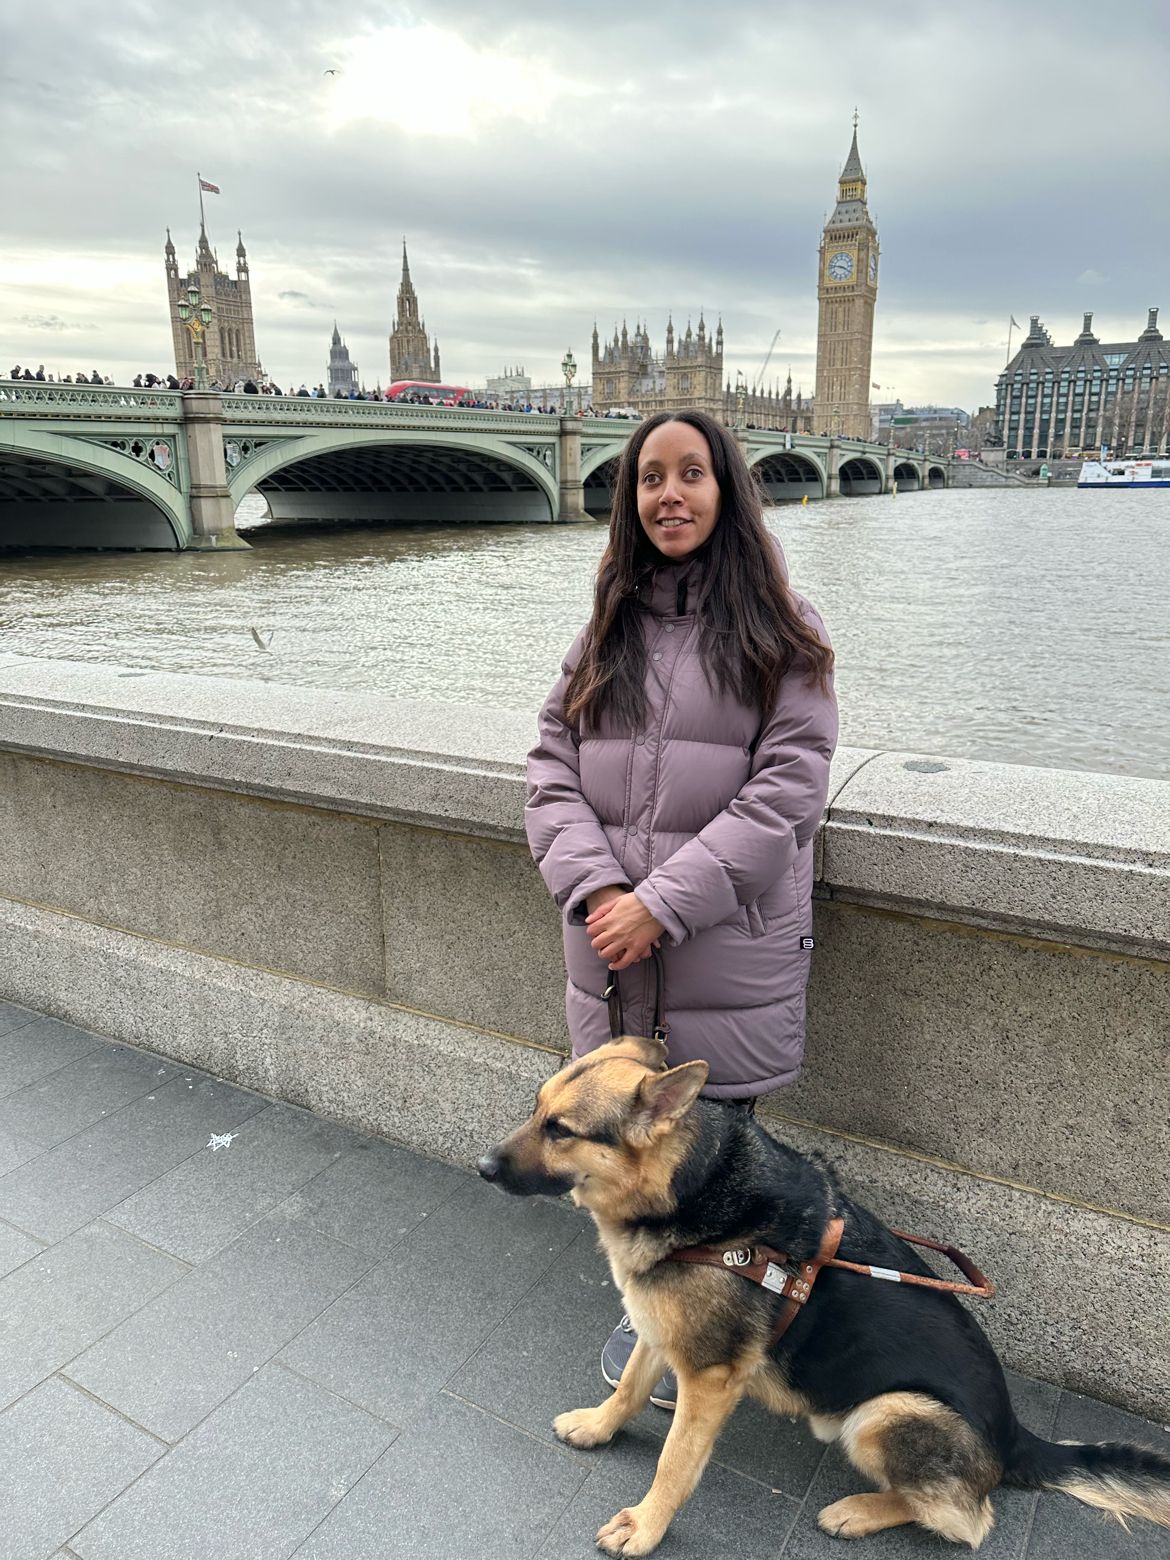 Mylo & I standing before the River Thames across from Parliament and Big Ben. Mylo, a German Shepherd, wears a brown leather and metal harness from The Seeing Eye in New Jersey.